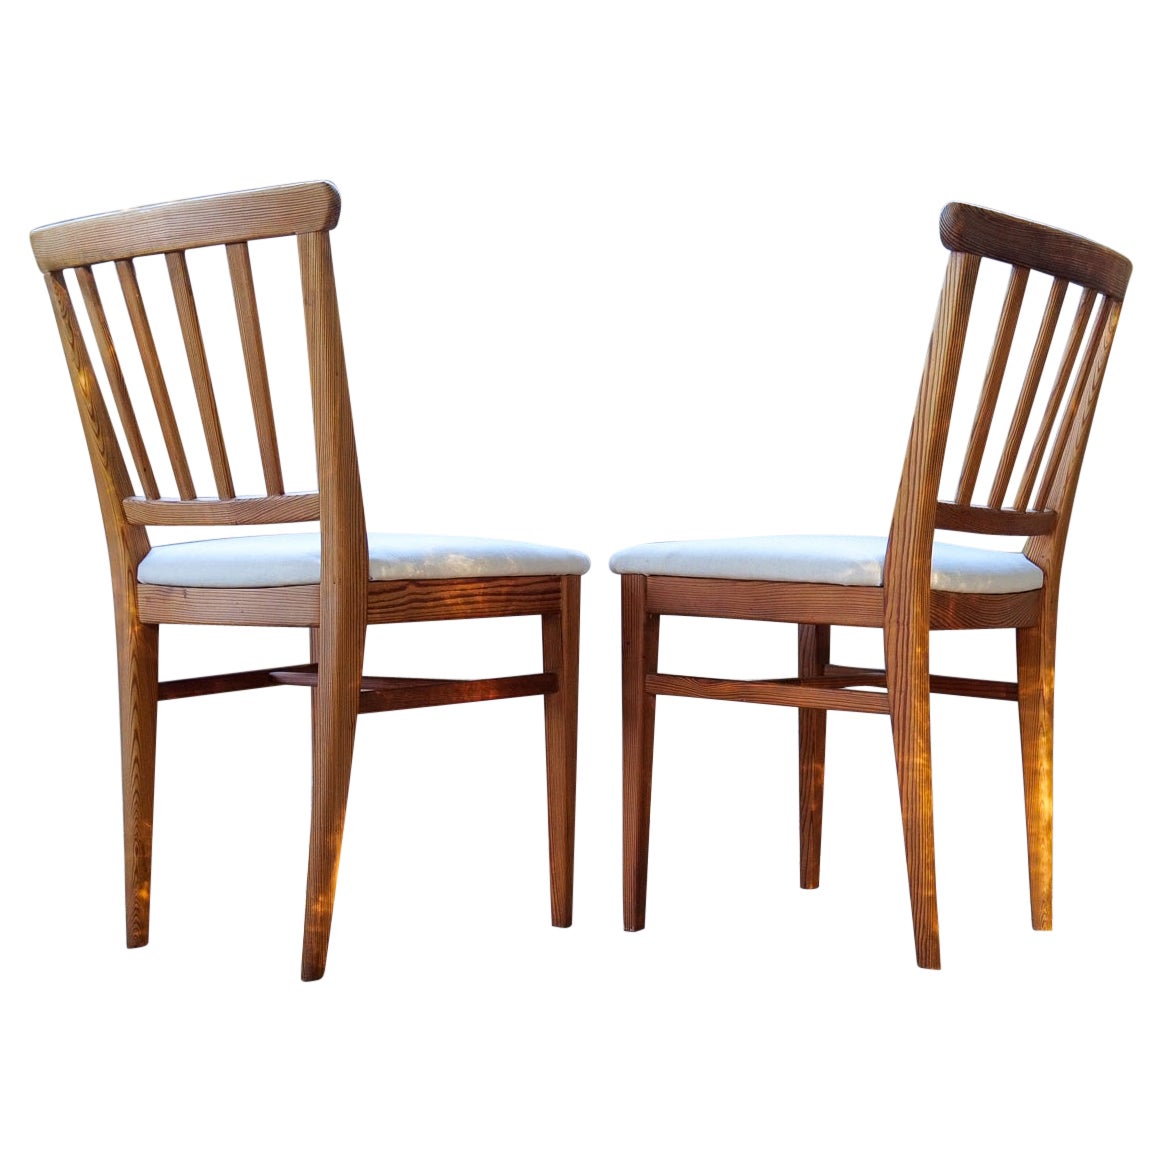 Midcentury Set of 4 Carl Malmsten Chairs Dining in Pine, Sweden, 1940s For Sale